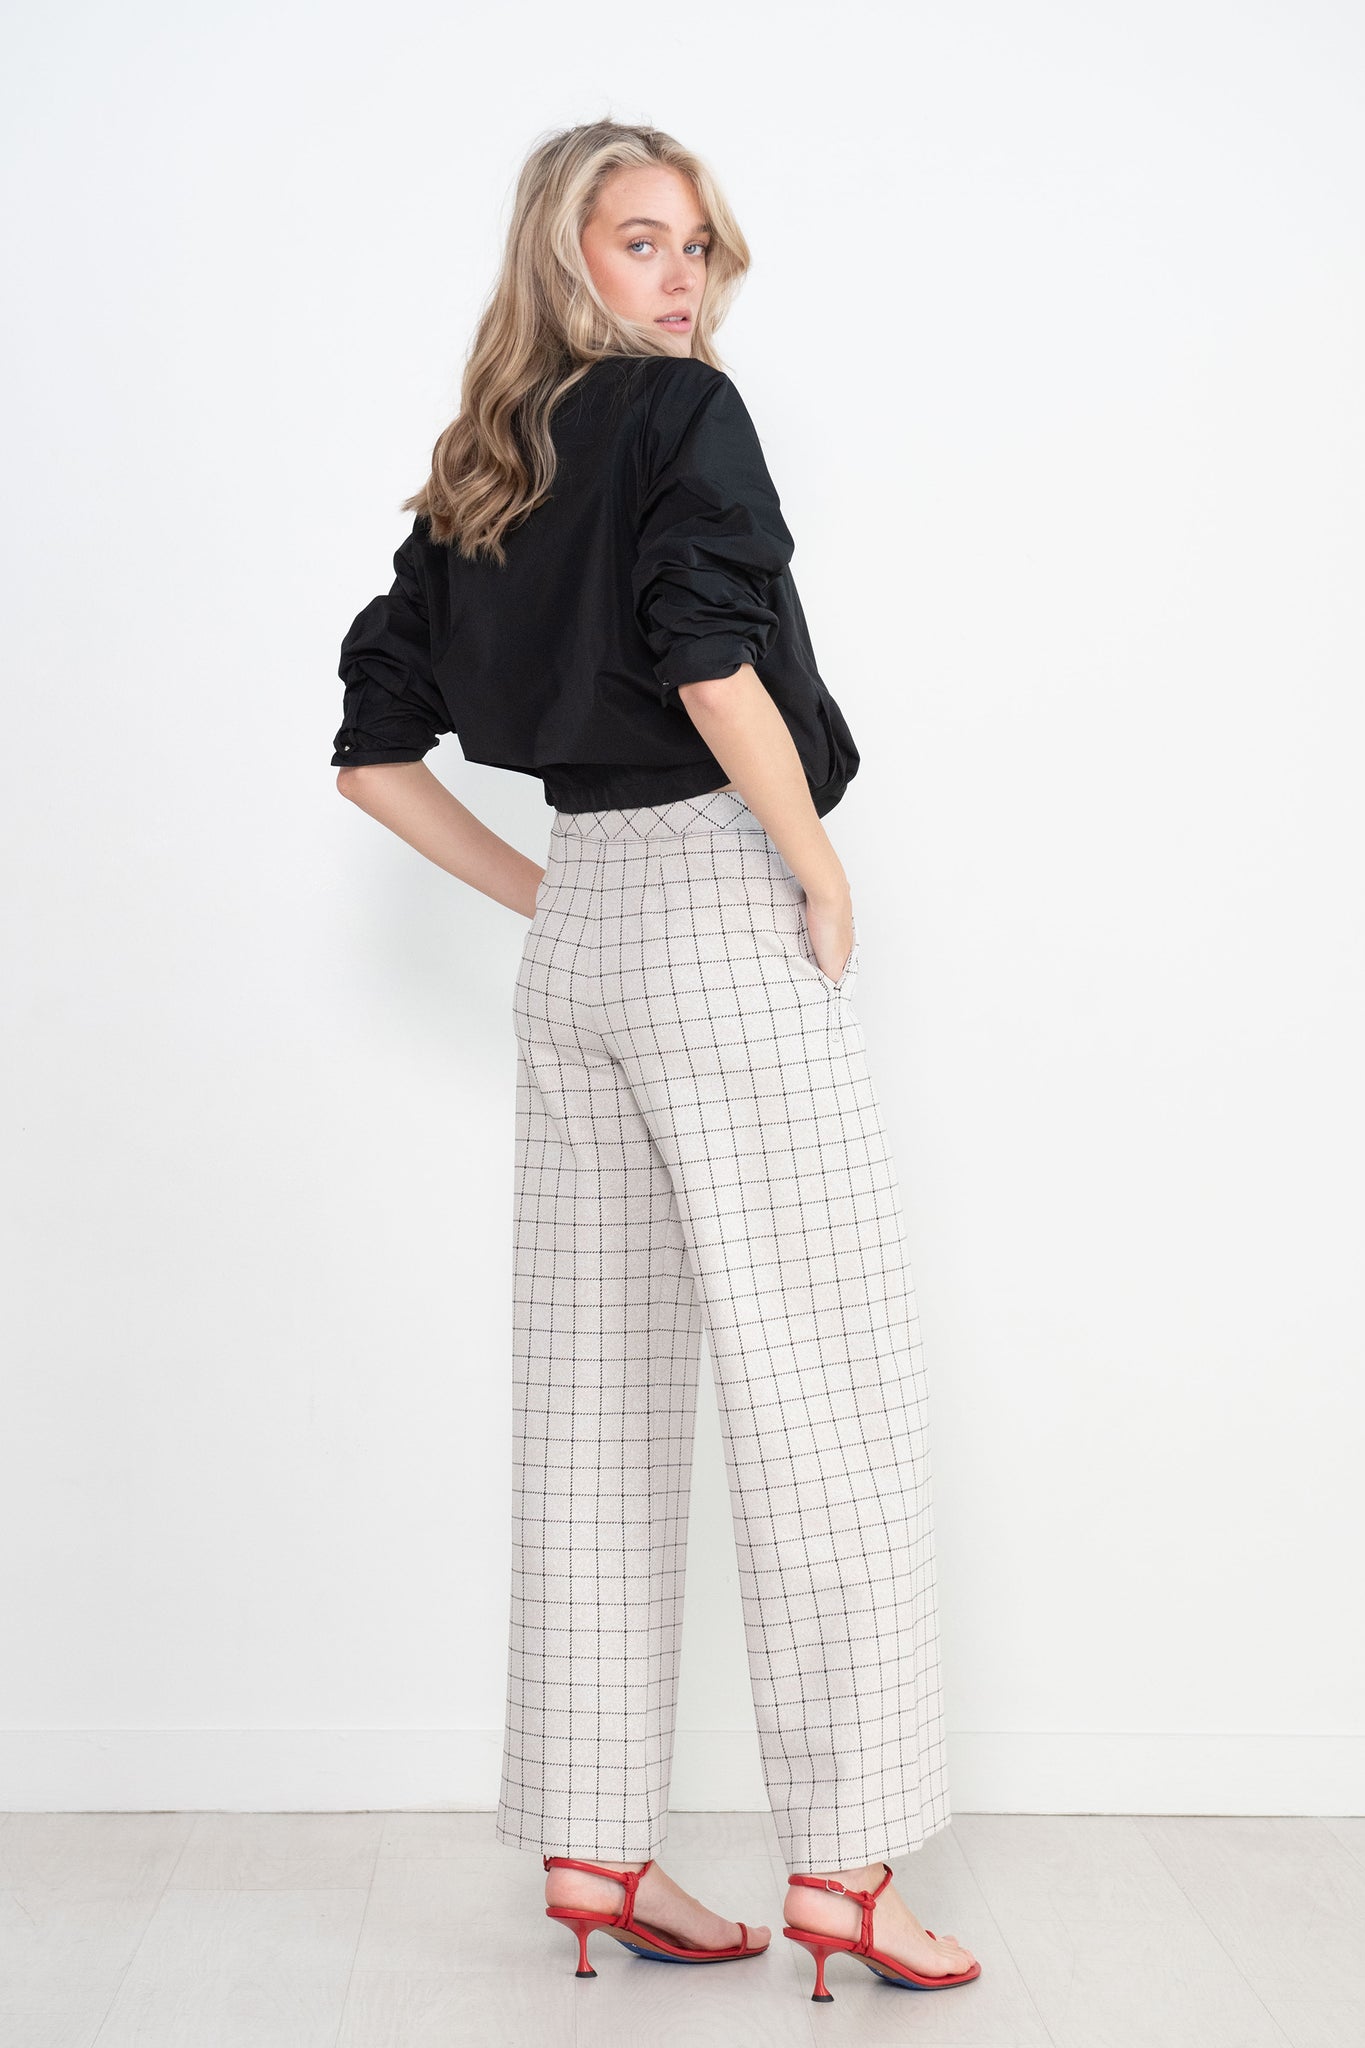 ROSETTA GETTY - Straight Leg Pull On Pant, Fawn and Black